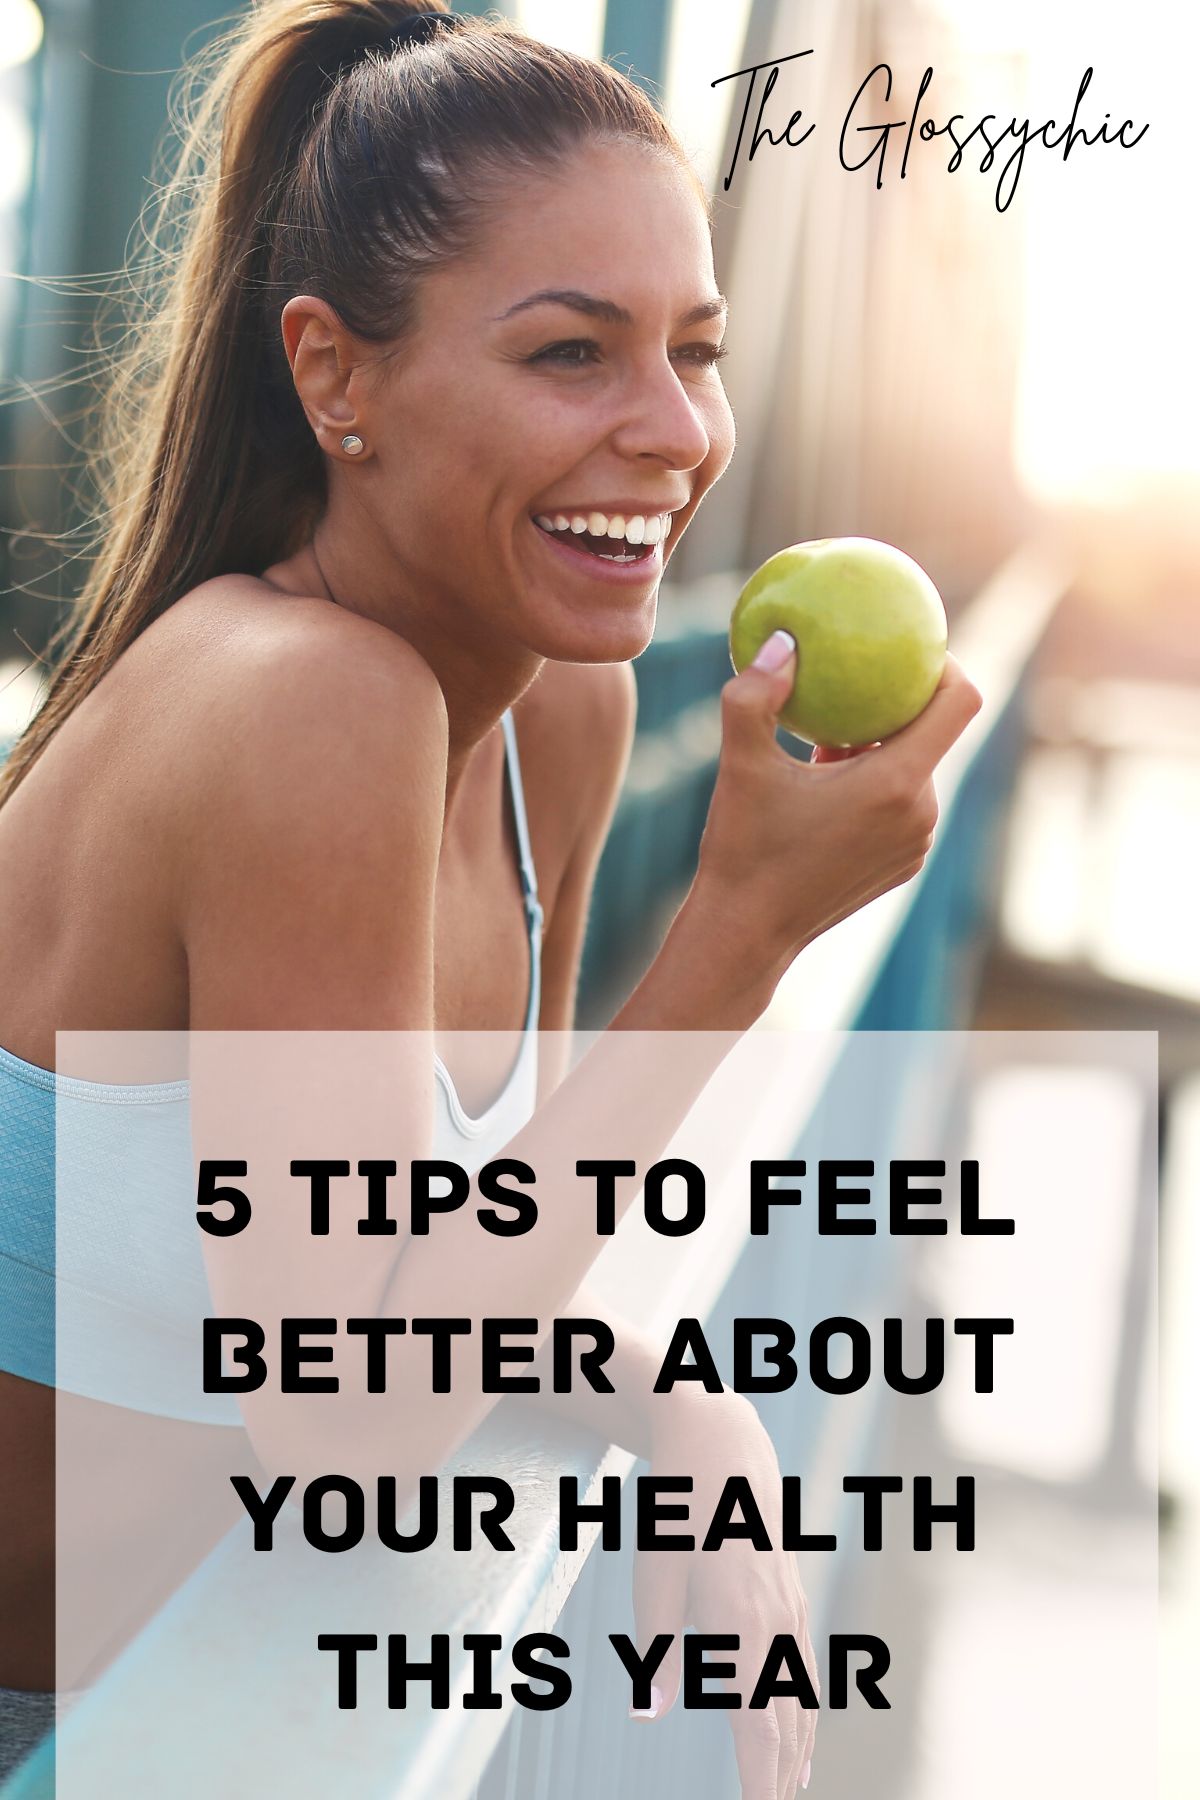 5 Tips To Feel Better About Your Health This Year